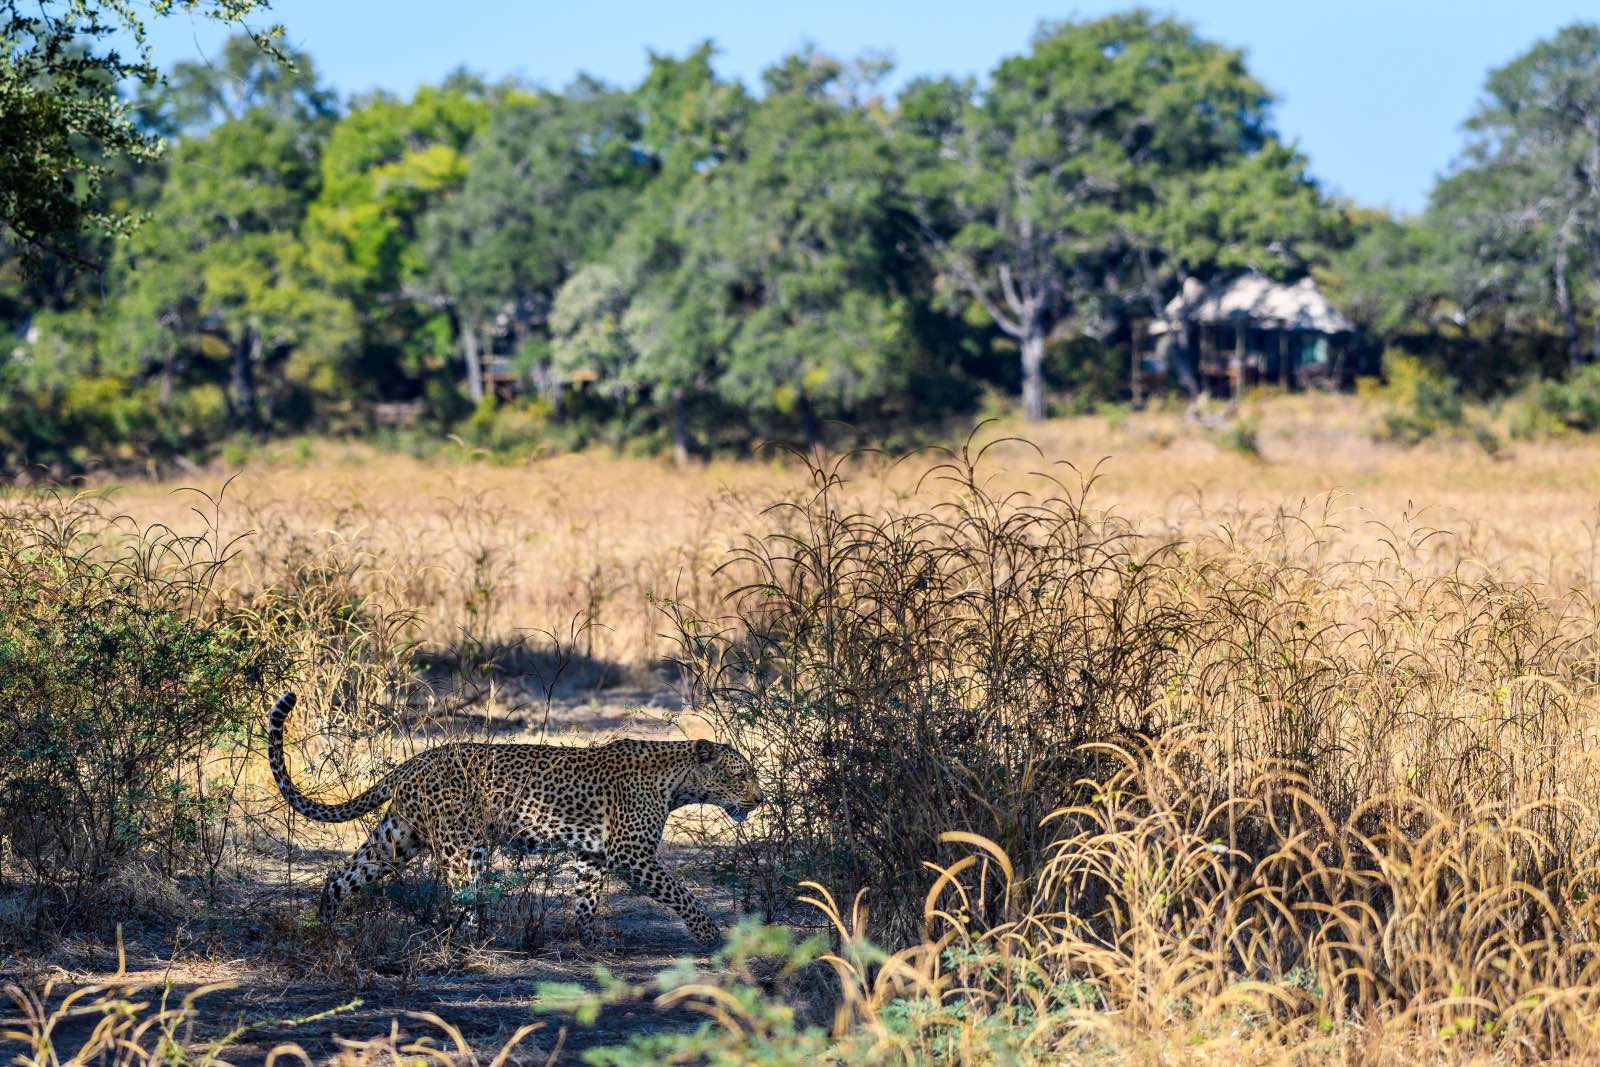 Leopard stalks in the grass in front of Chindeni